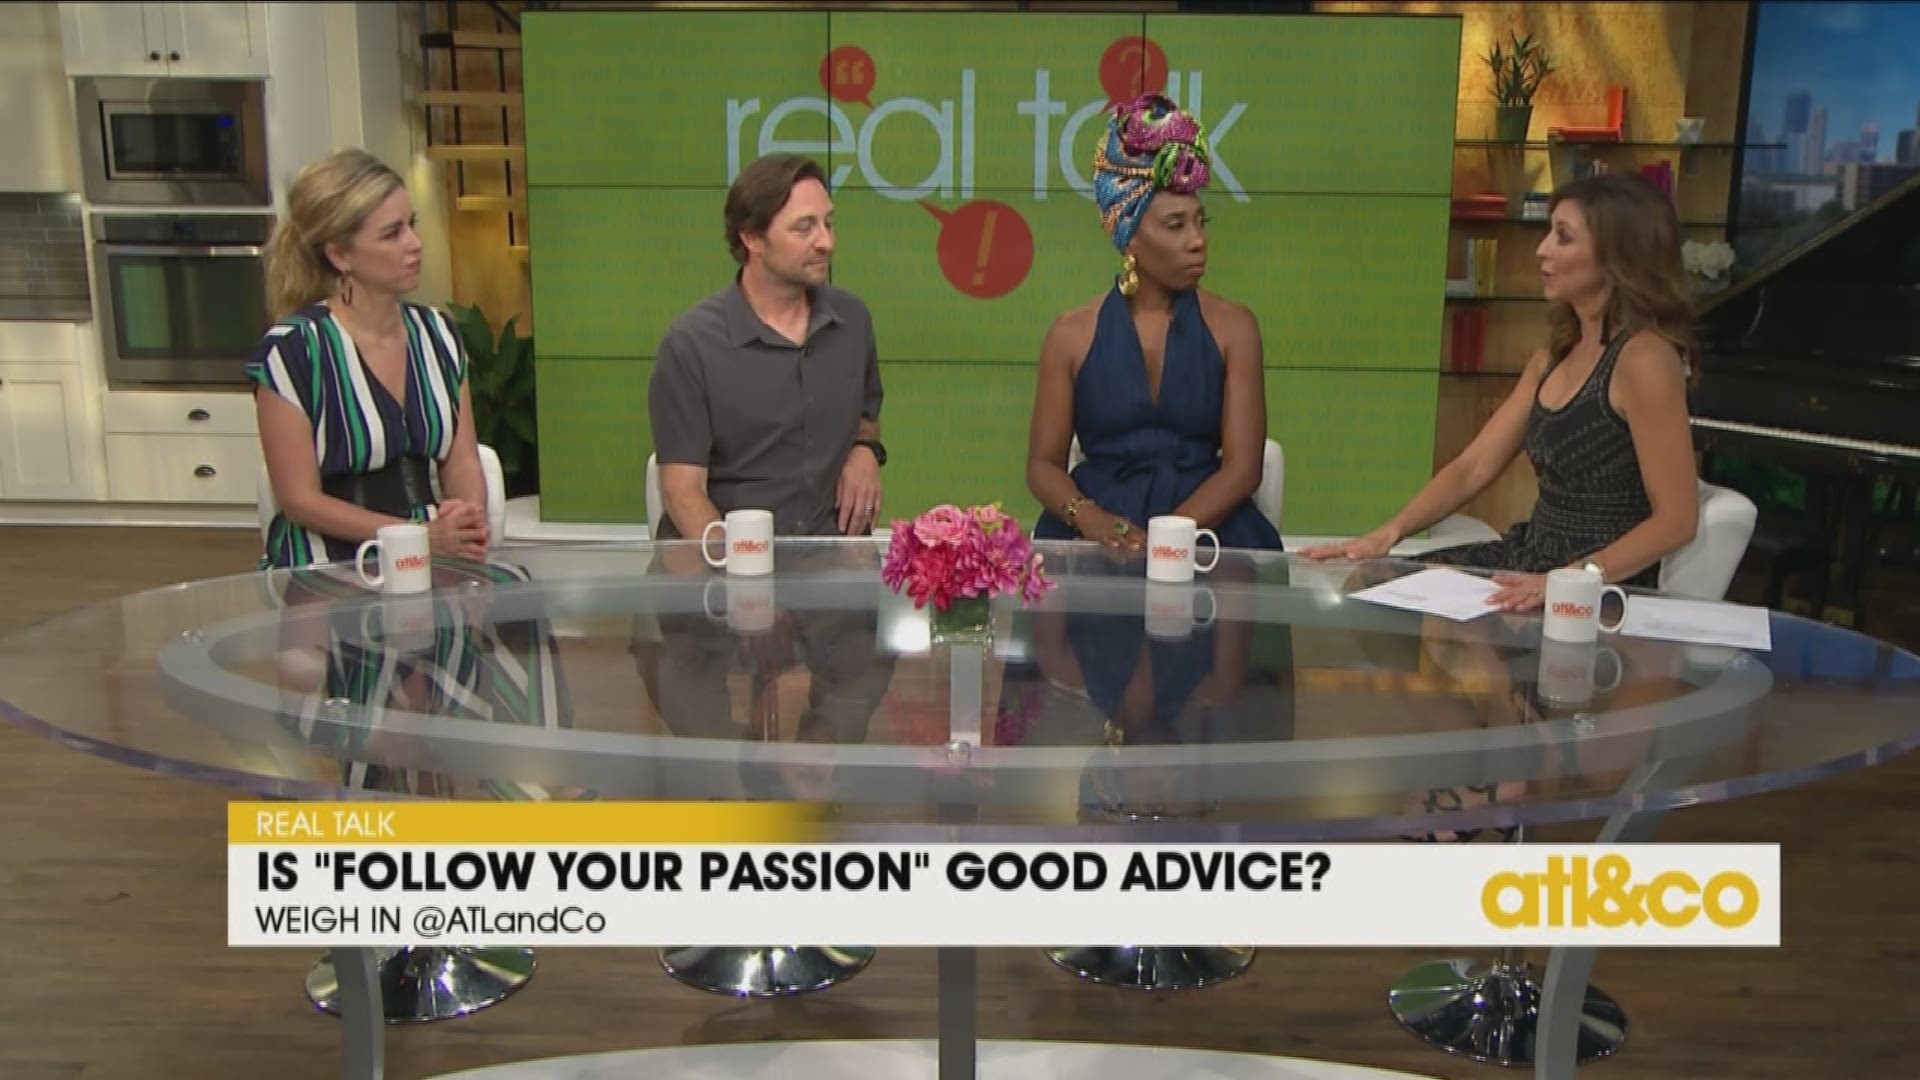 Is "Follow Your Passion" good or bad advice? Join our Real Talk discussion on 'Atlanta & Company'